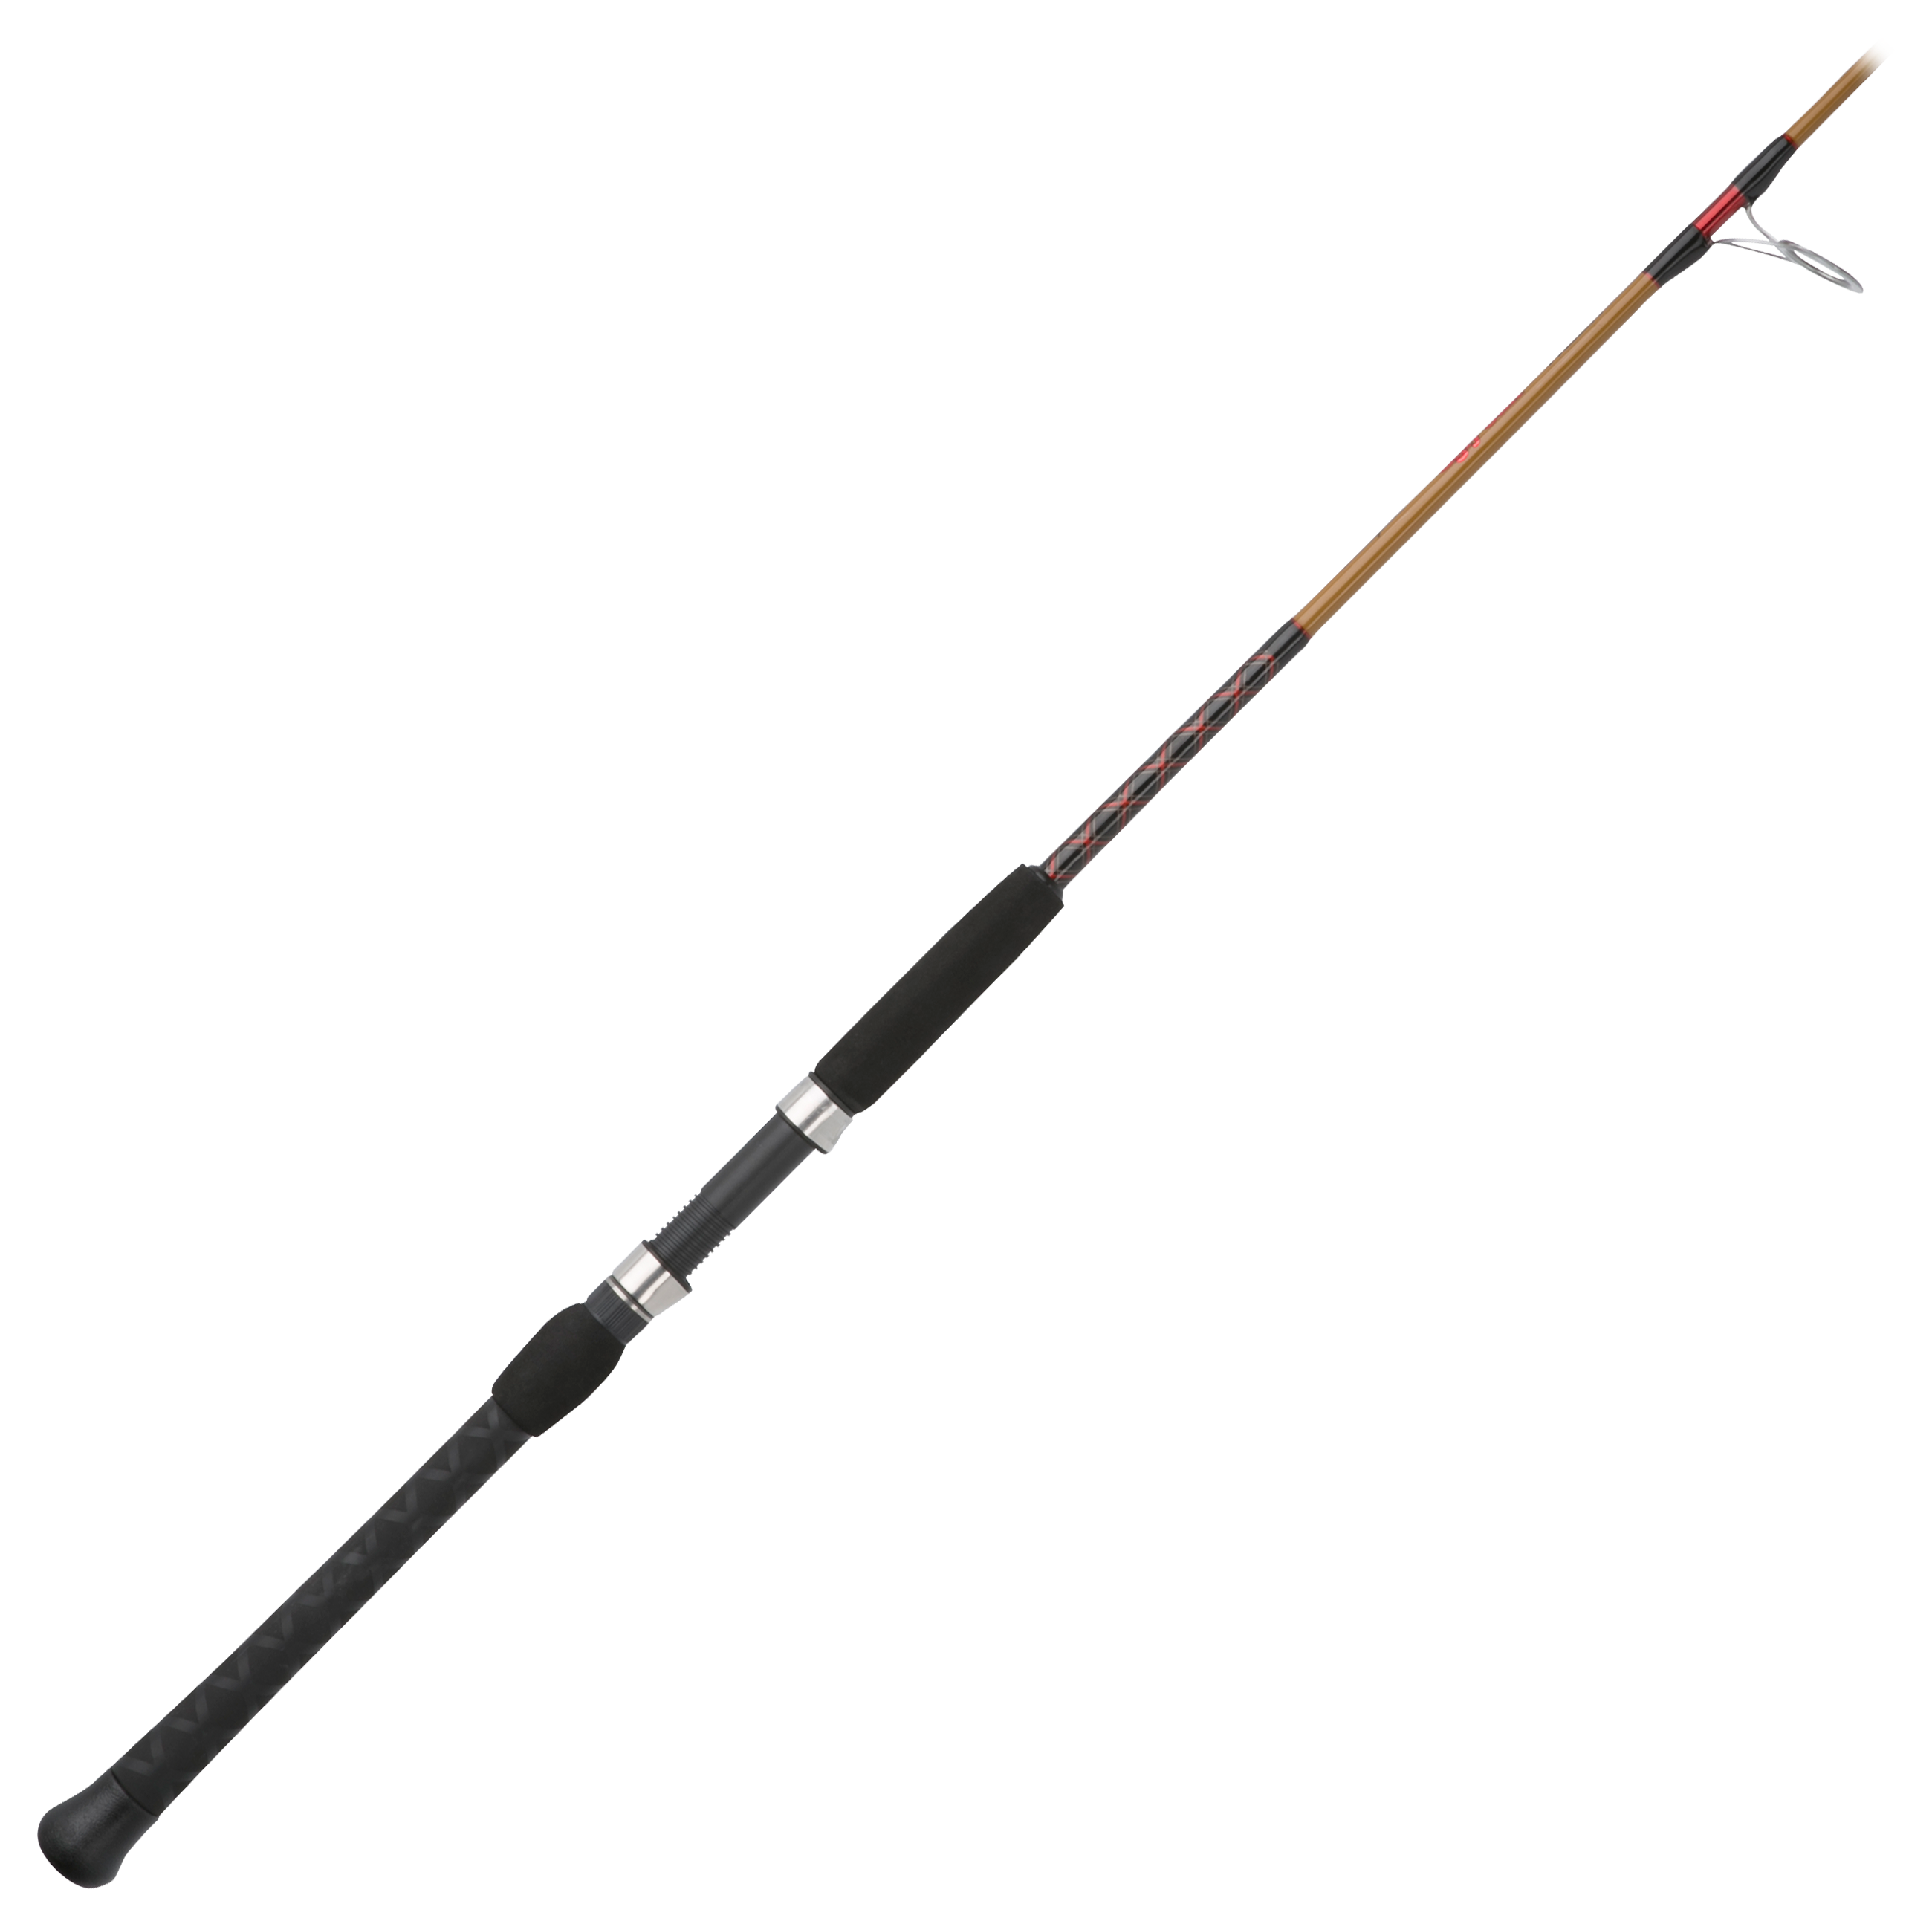  Ugly Stik 7' Tiger Elite Spinning Rod, One Piece  Nearshore/Offshore Rod, 14-40lb Line Rating, Heavy Rod Power, 1-5 oz. Lure  Rating, Versatile and Dependable,Black : Sports & Outdoors